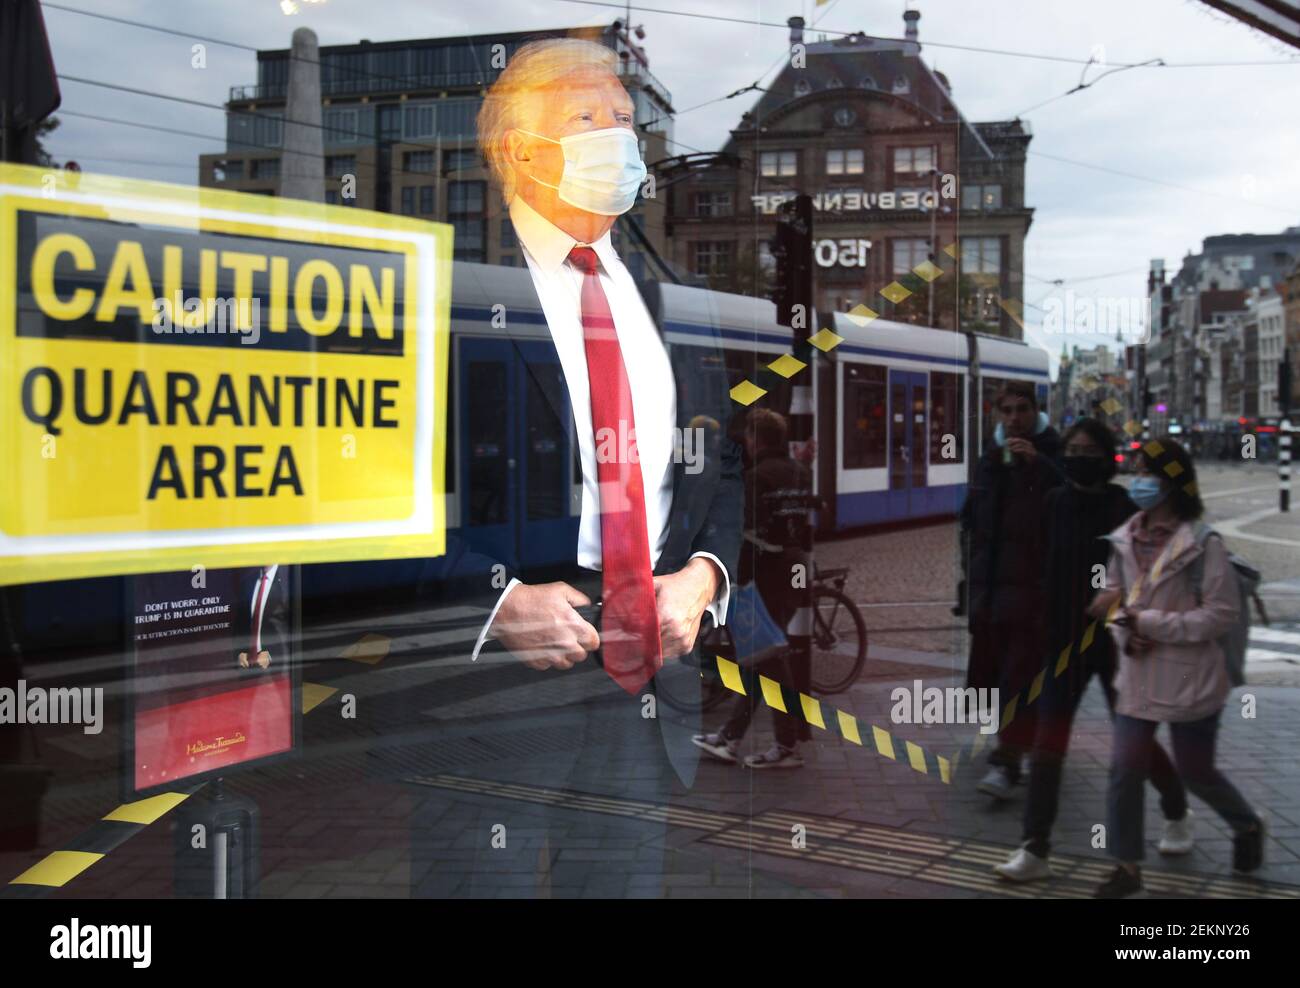 The wax figure of US President Donald Trump wear face mask are seen in the window with sign caution quarentine area at the Madame Tussaud downtown Amsterdam amid the Coronavirus pandemic on October 2, 2020 in Amsterdam,Netherlands. Trump and his wife Melania have tested positive for with the coronavirus are quarantined at the White House. (Photo by Paulo Amorim/Sipa USA) Stock Photo